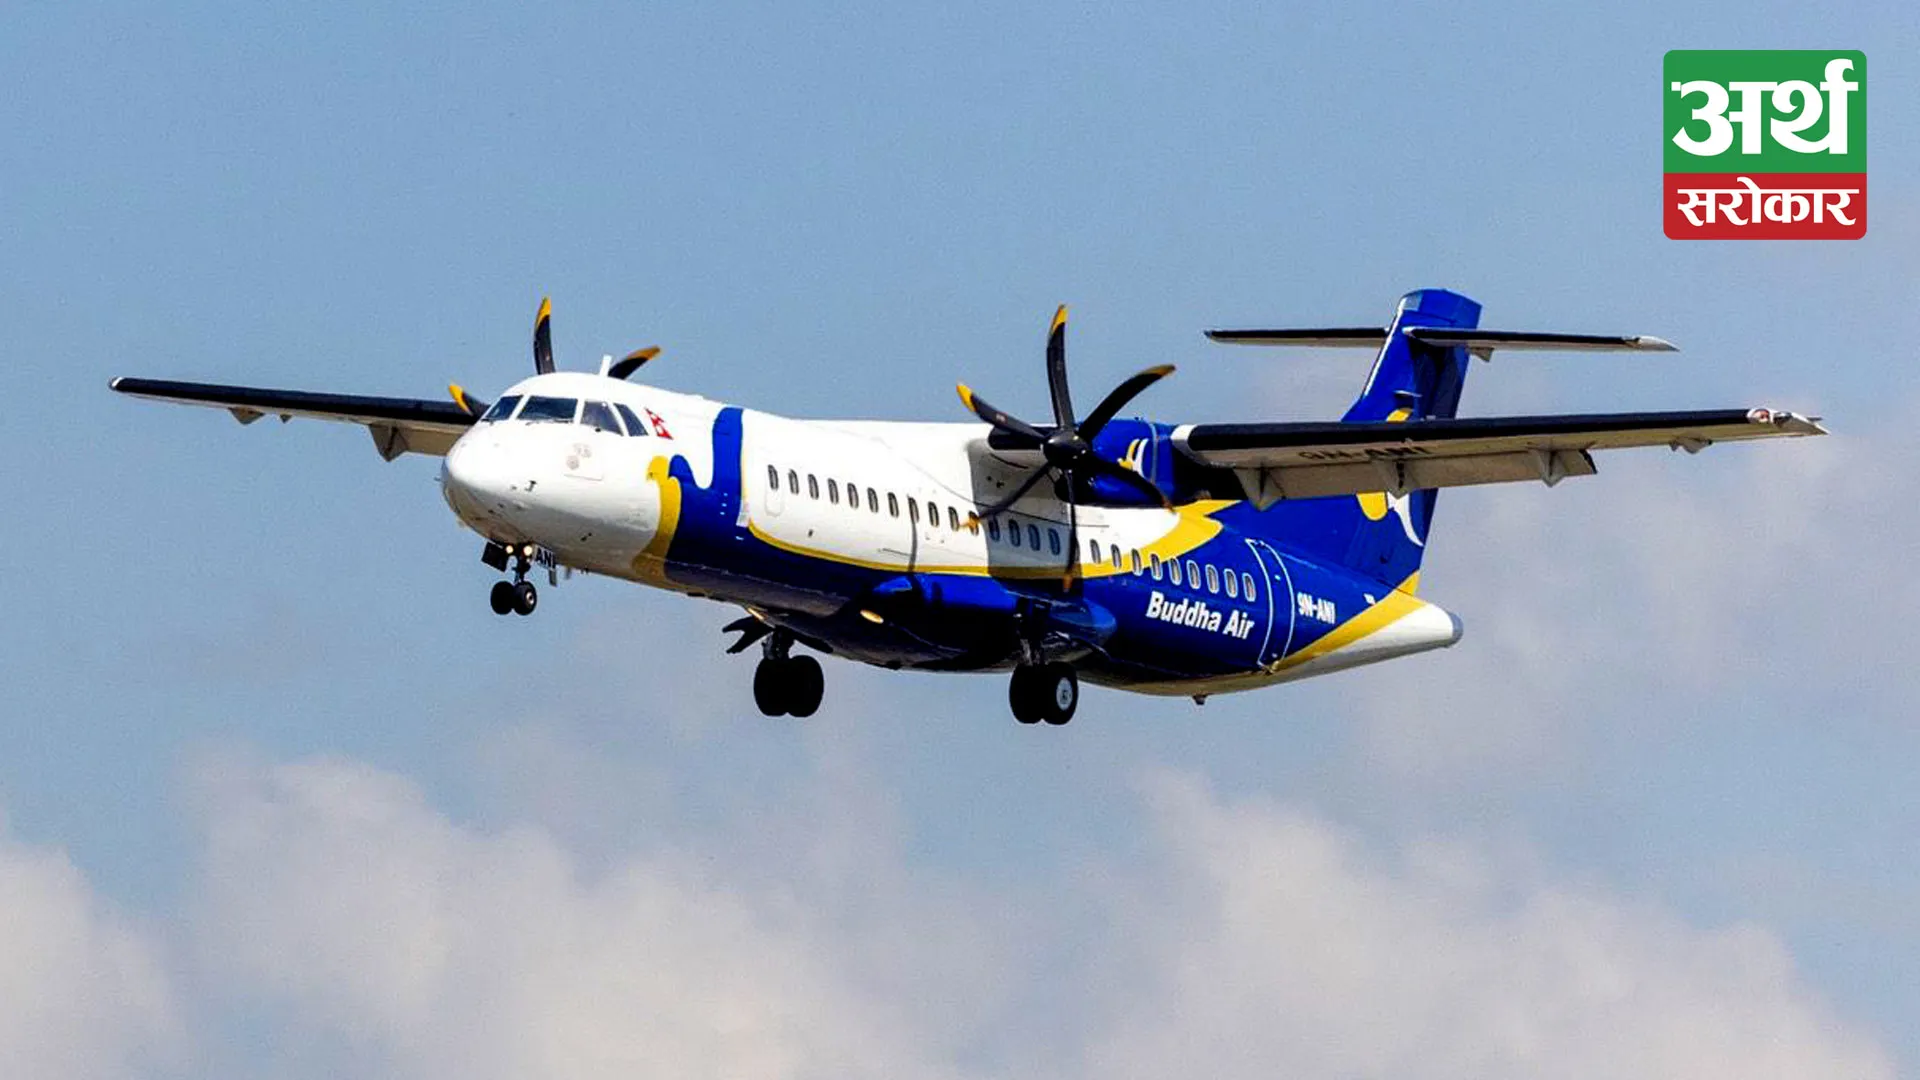 Buddha Air celebrates 26 years of excellence and plans to add new ATR aircraft within this month